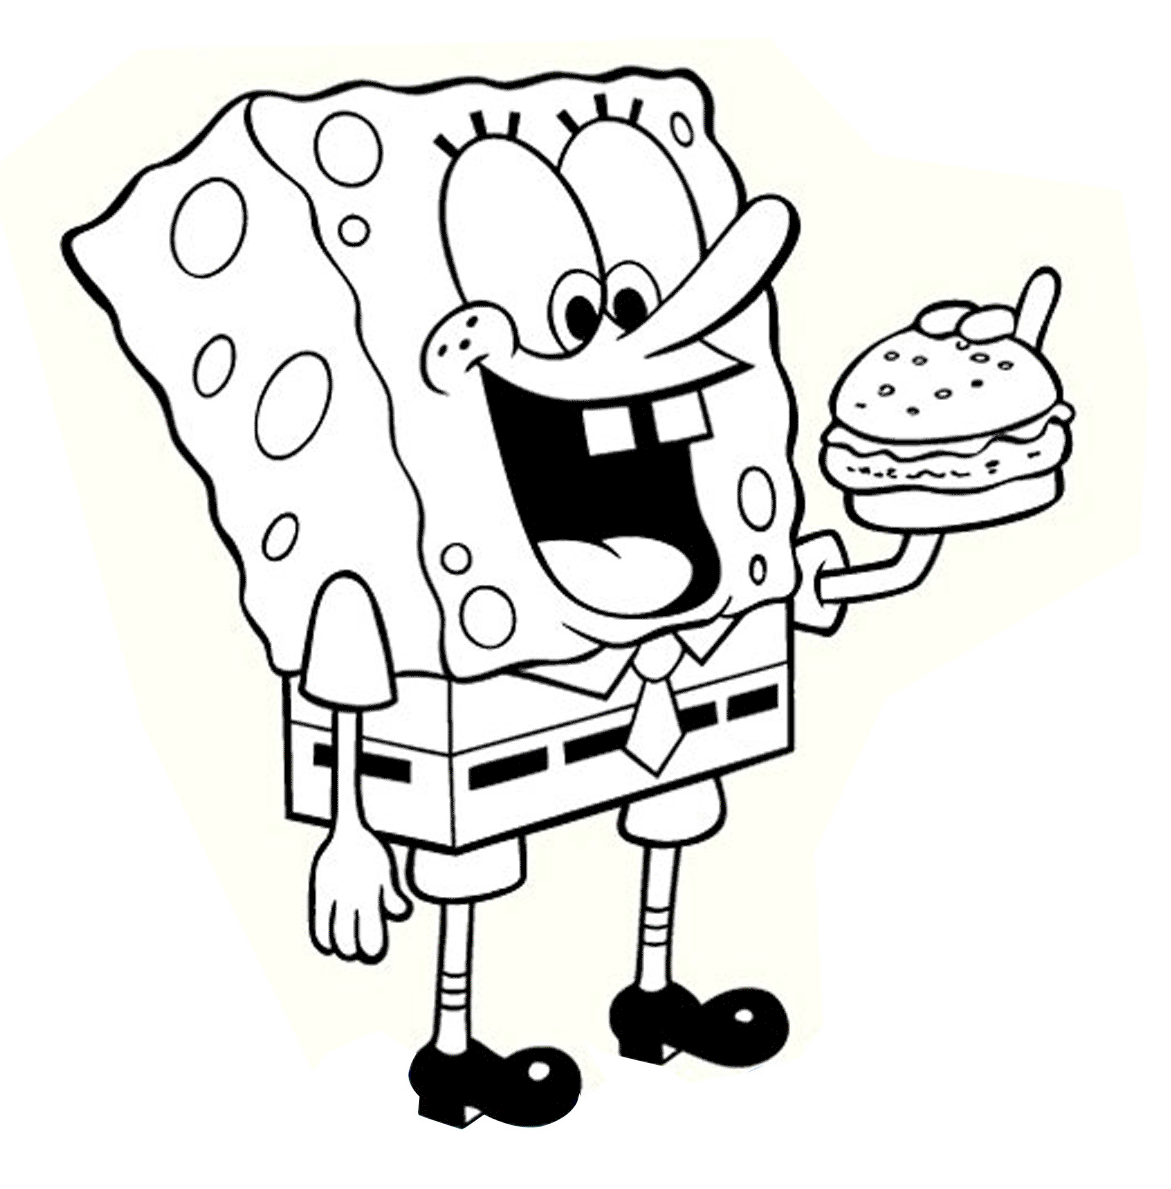 spongebob squarepants coloring pages eating krabby patty Coloring4free